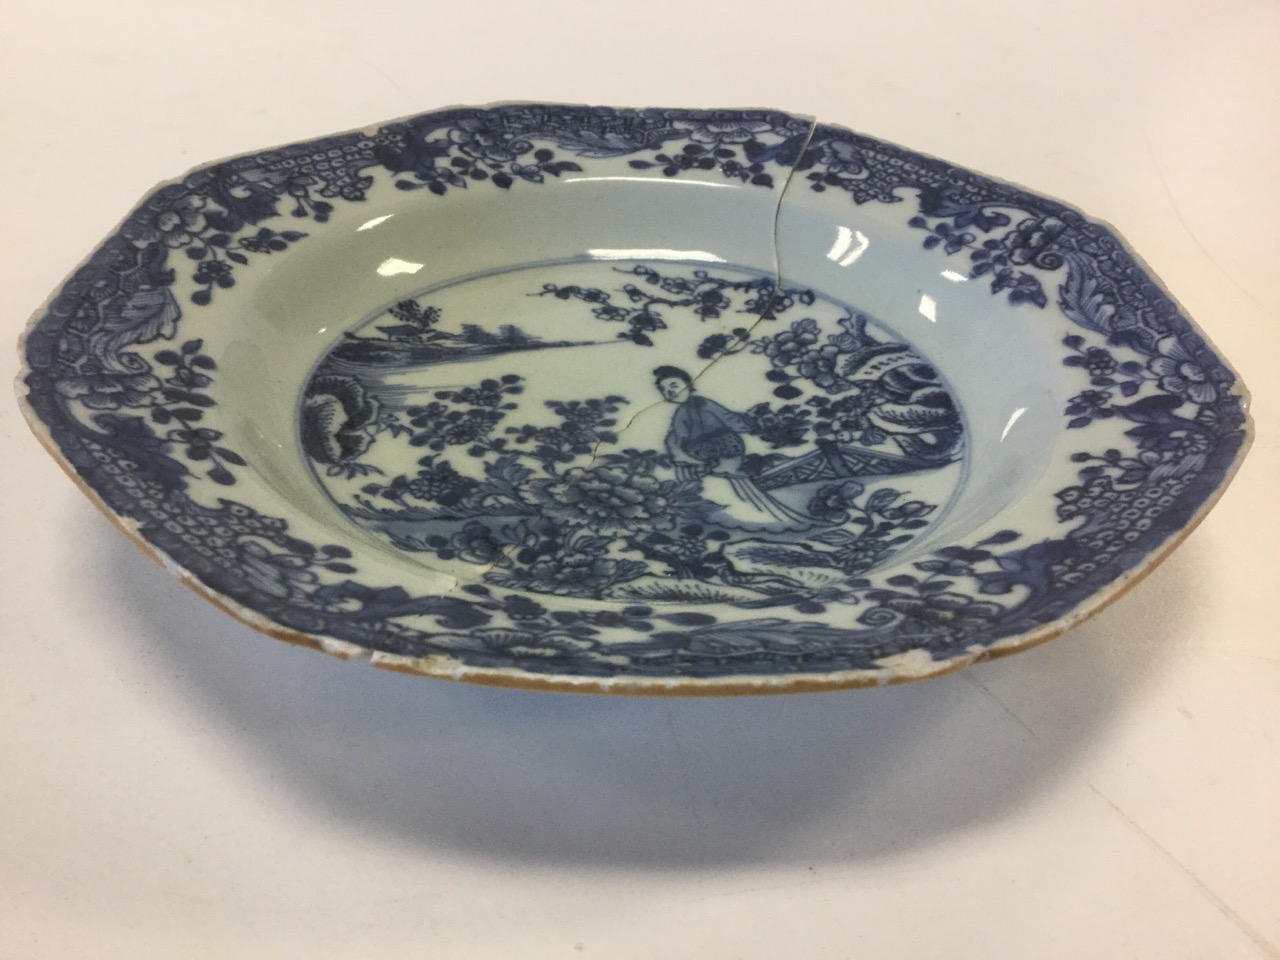 An octagonal nineteenth century Chinese porcelain blue & white bowl, decorated with figure in garden - Image 3 of 3